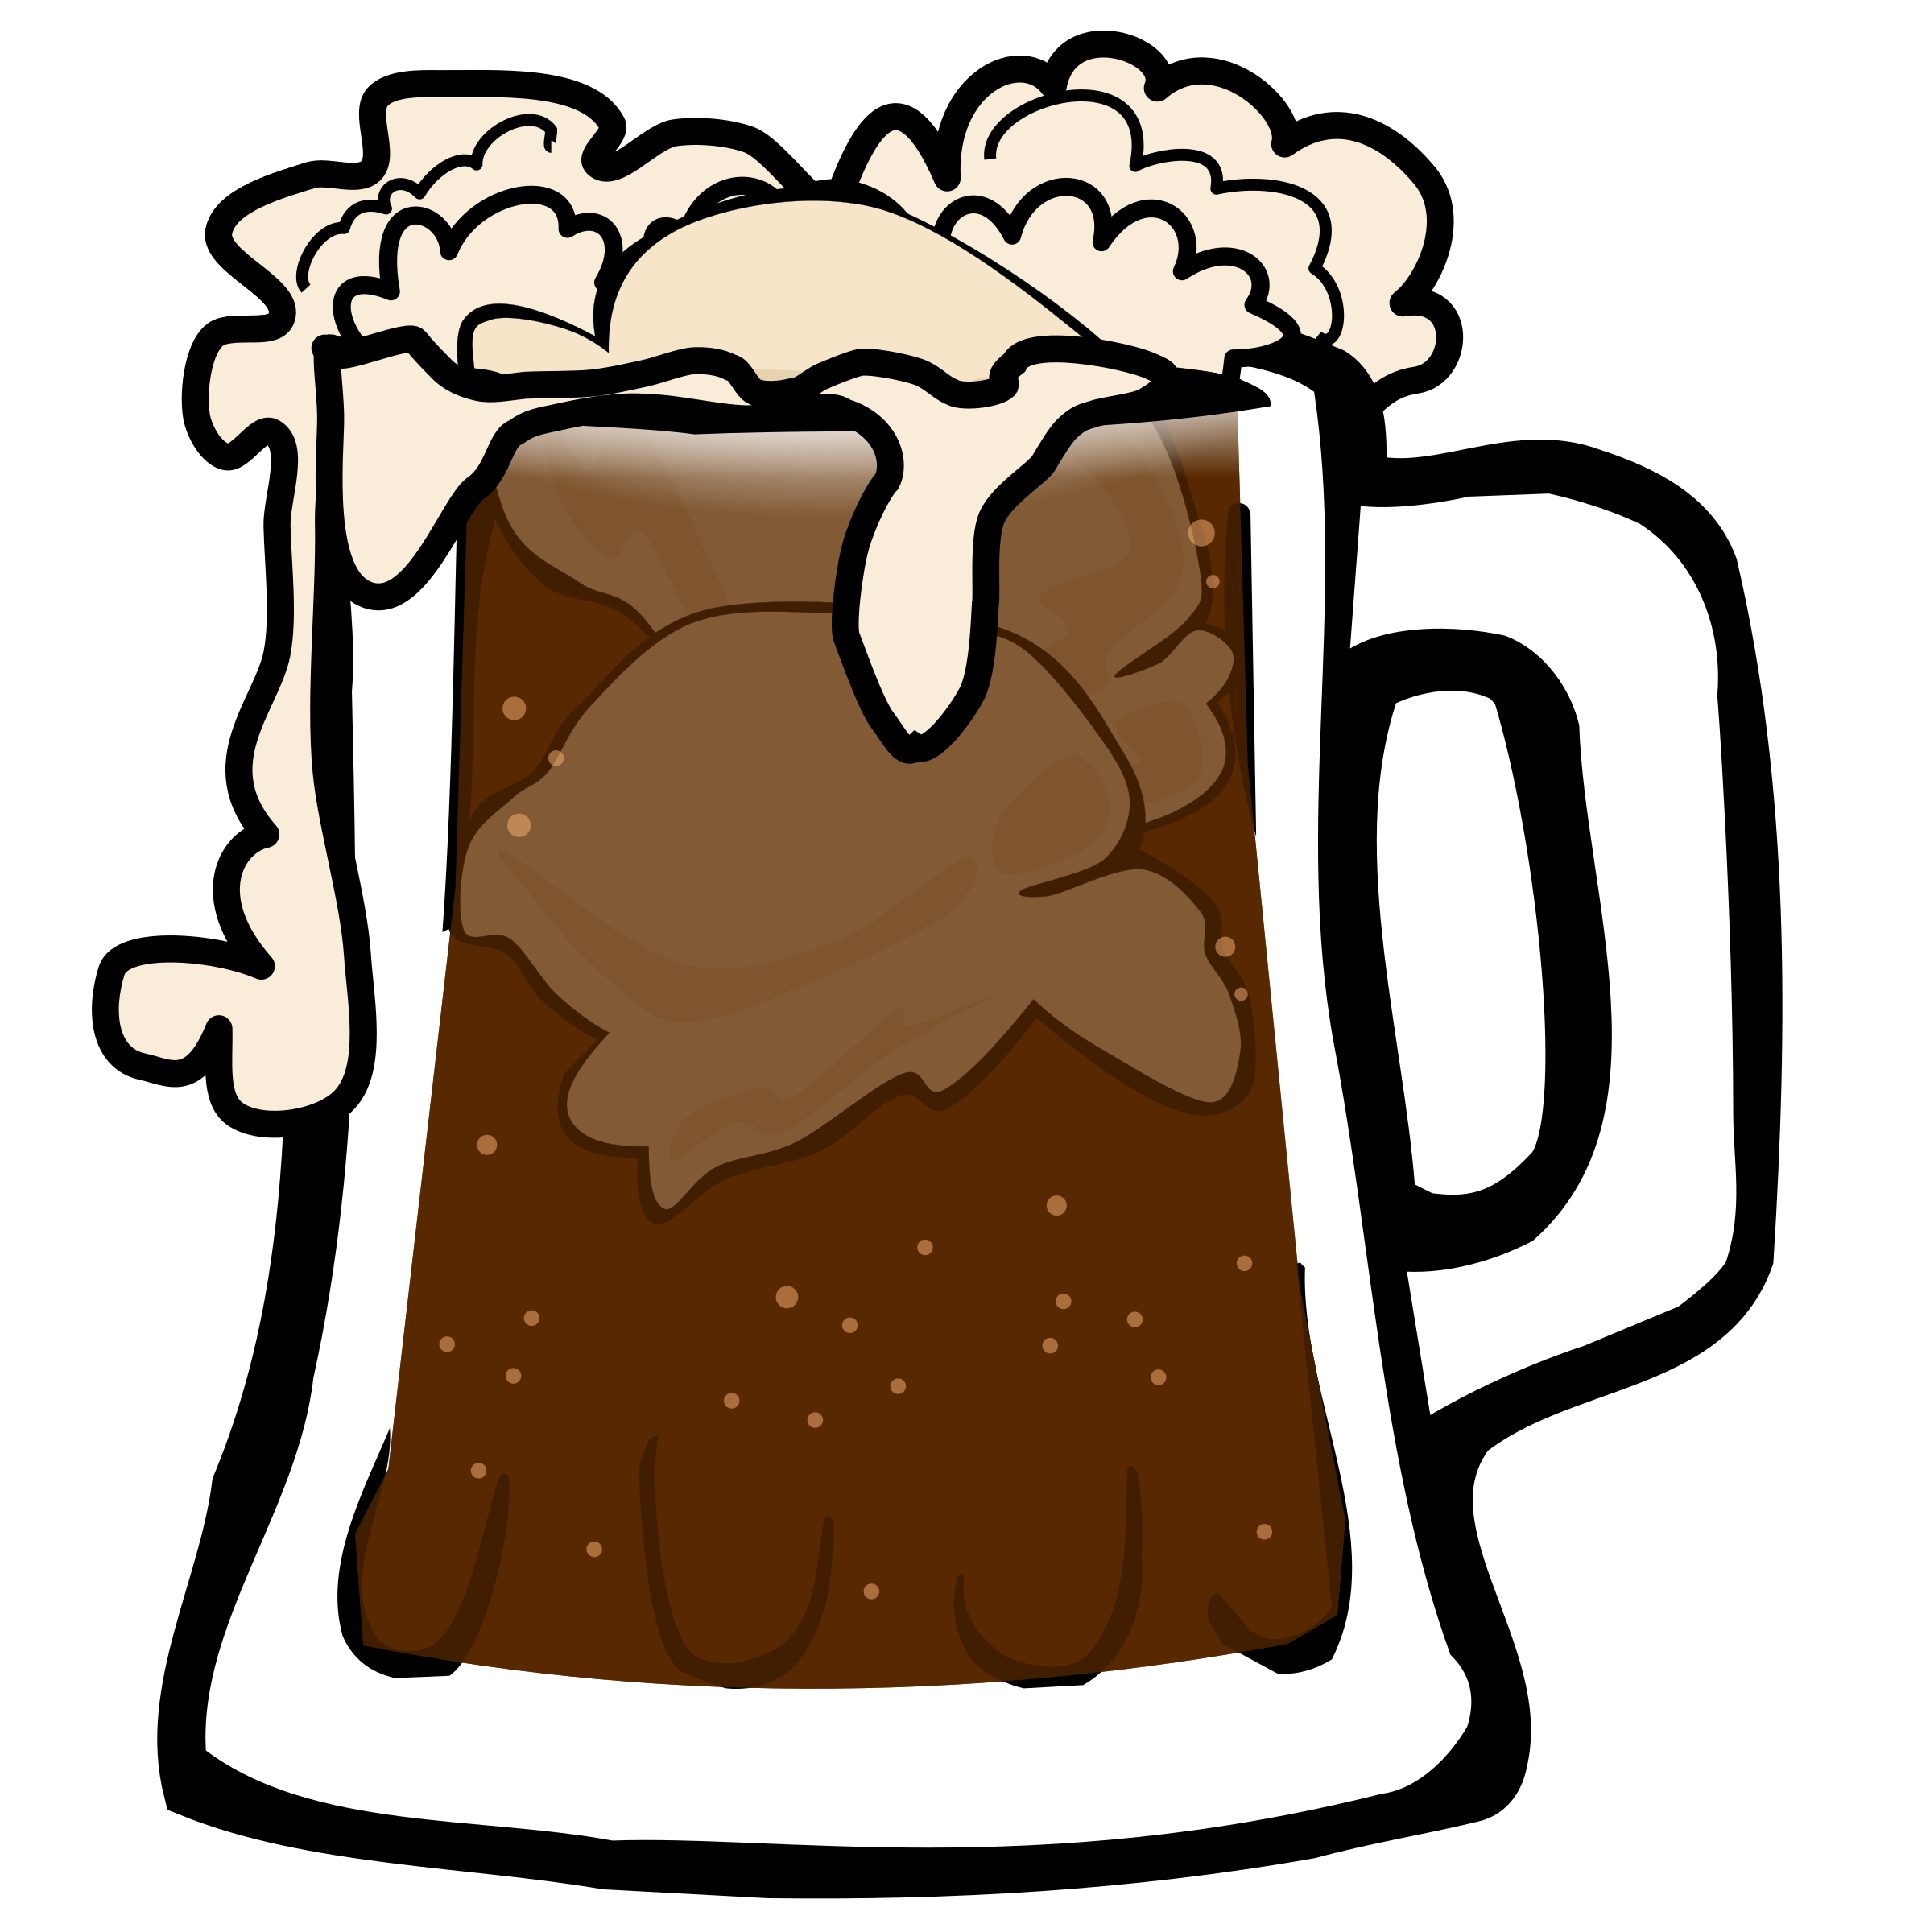 This Free Icons Png Design Of Root Beer Float Hdpng.com  - Root Beer Float, Transparent background PNG HD thumbnail